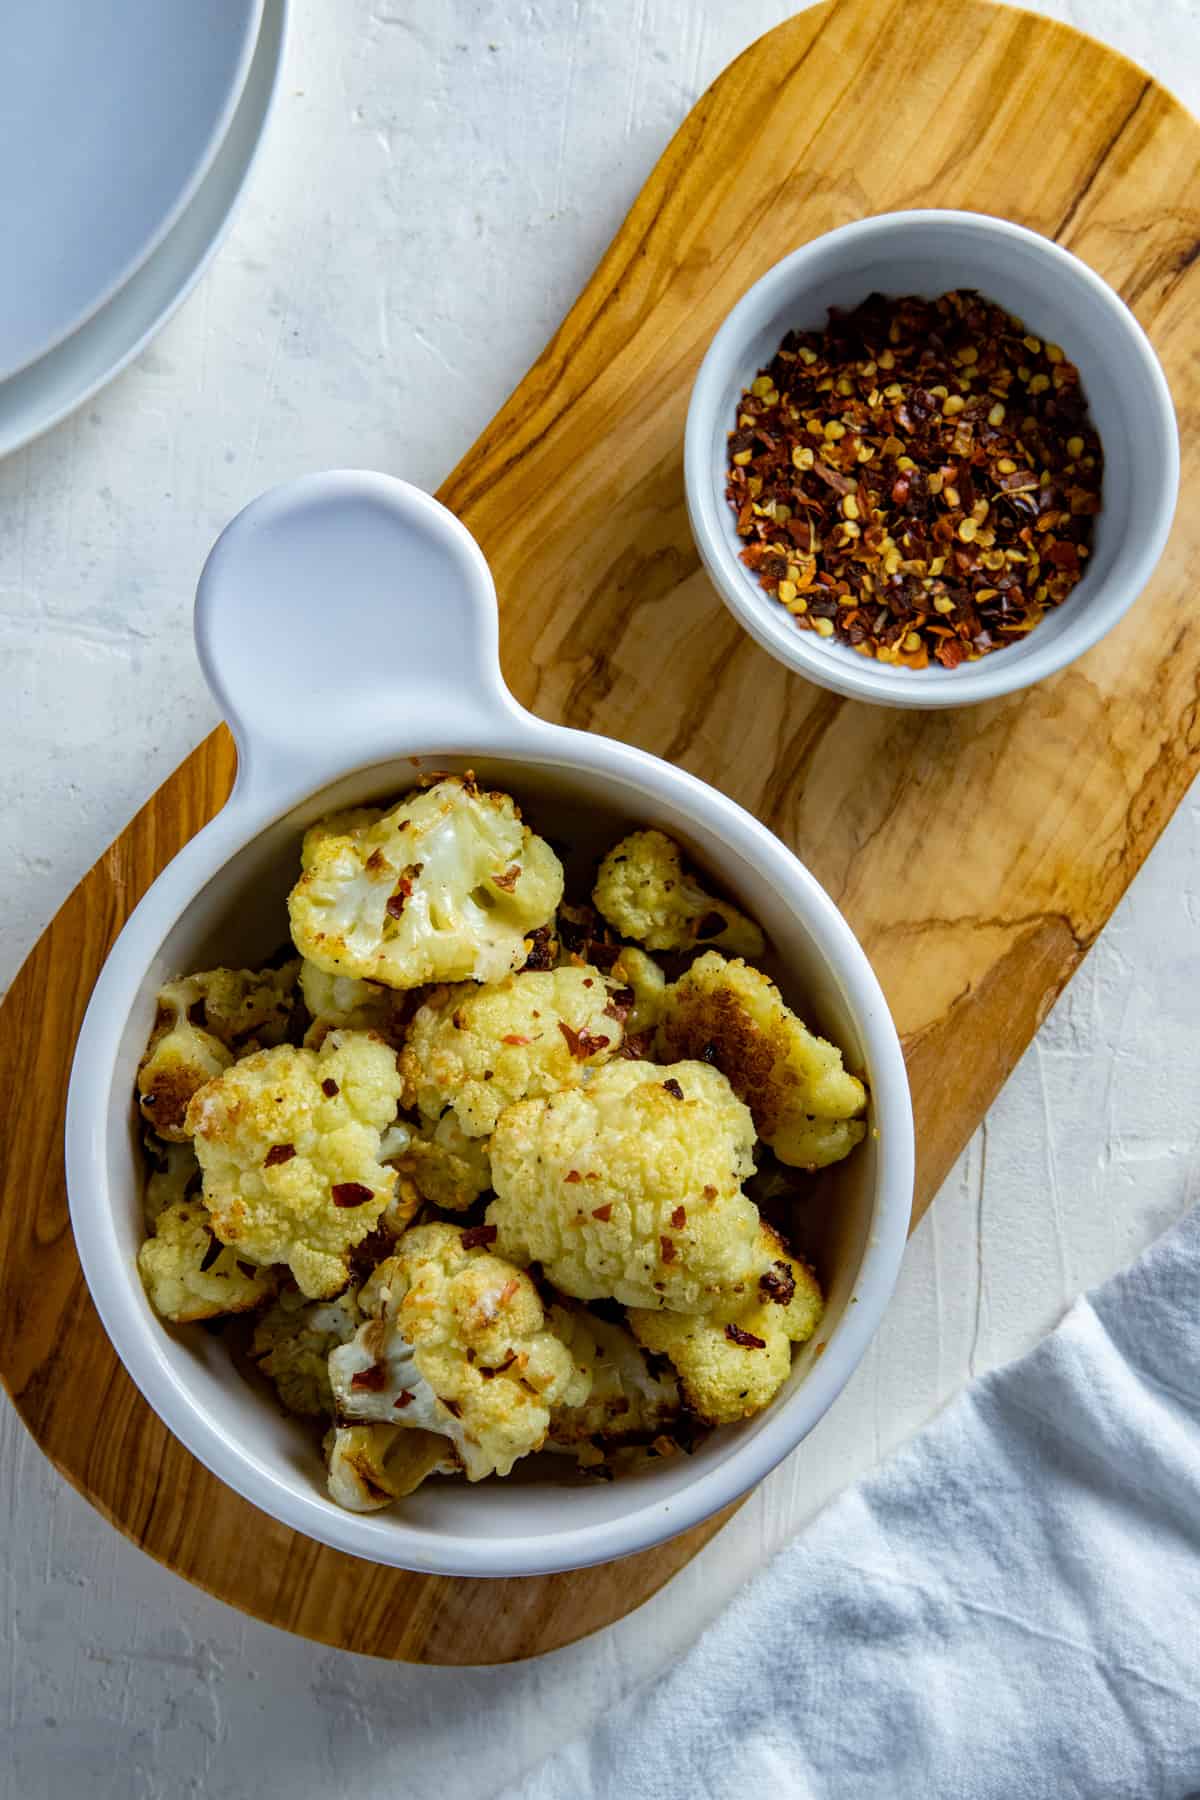 Bowl of roasted parmesan cauliflower with a small bowl of red pepper flakes on the side.  Both bowls sitting on a wooden platter.